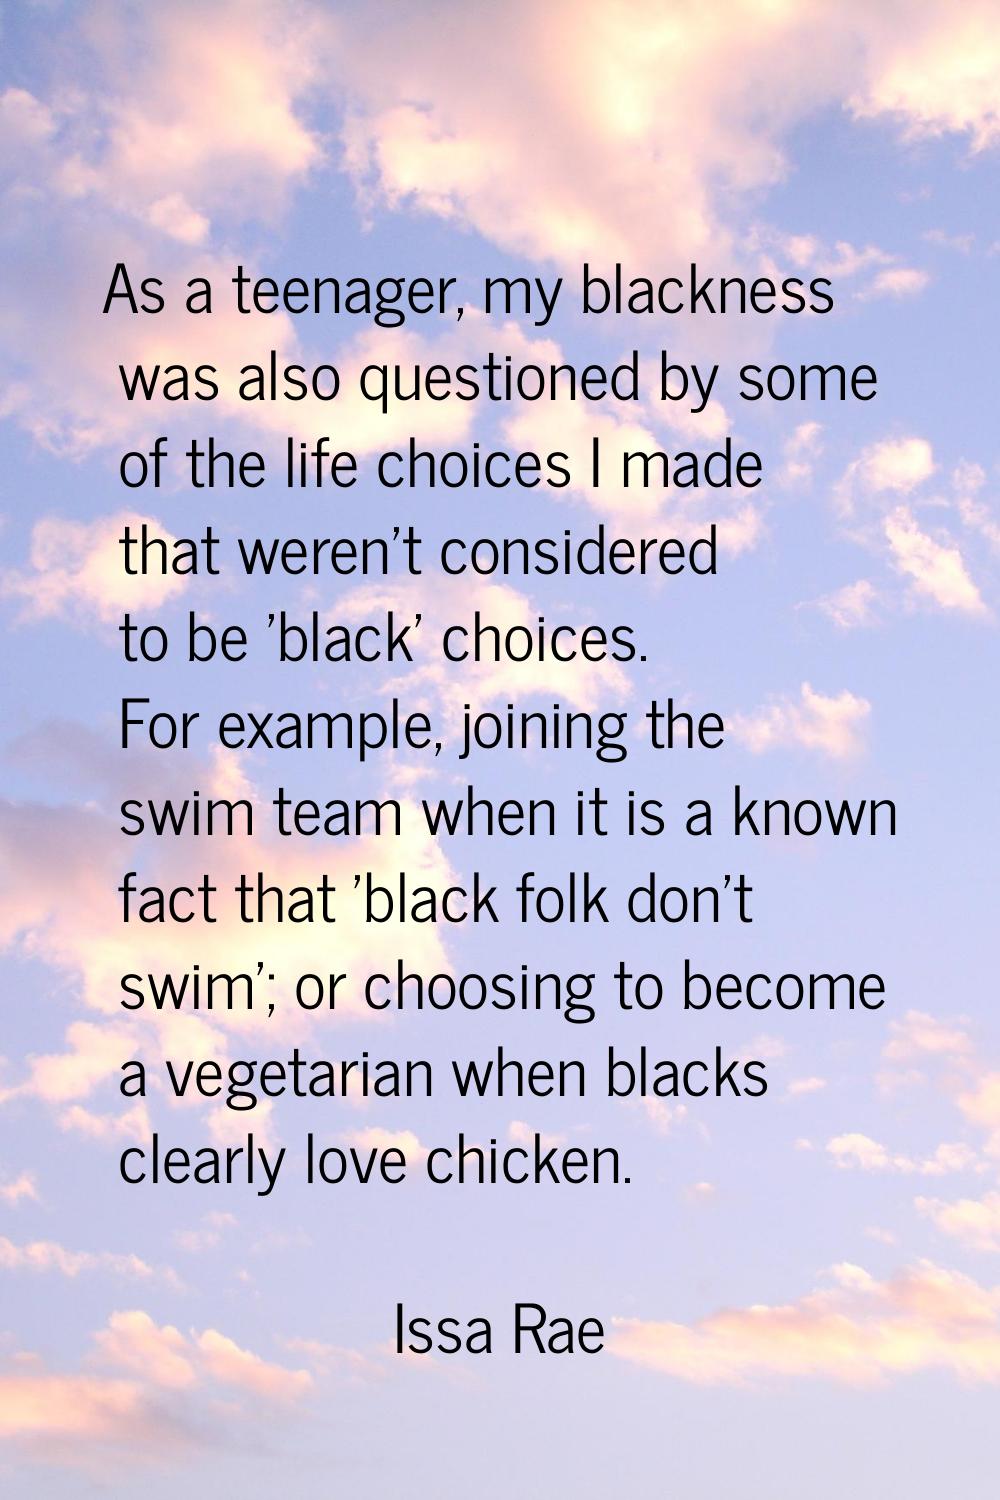 As a teenager, my blackness was also questioned by some of the life choices I made that weren't con